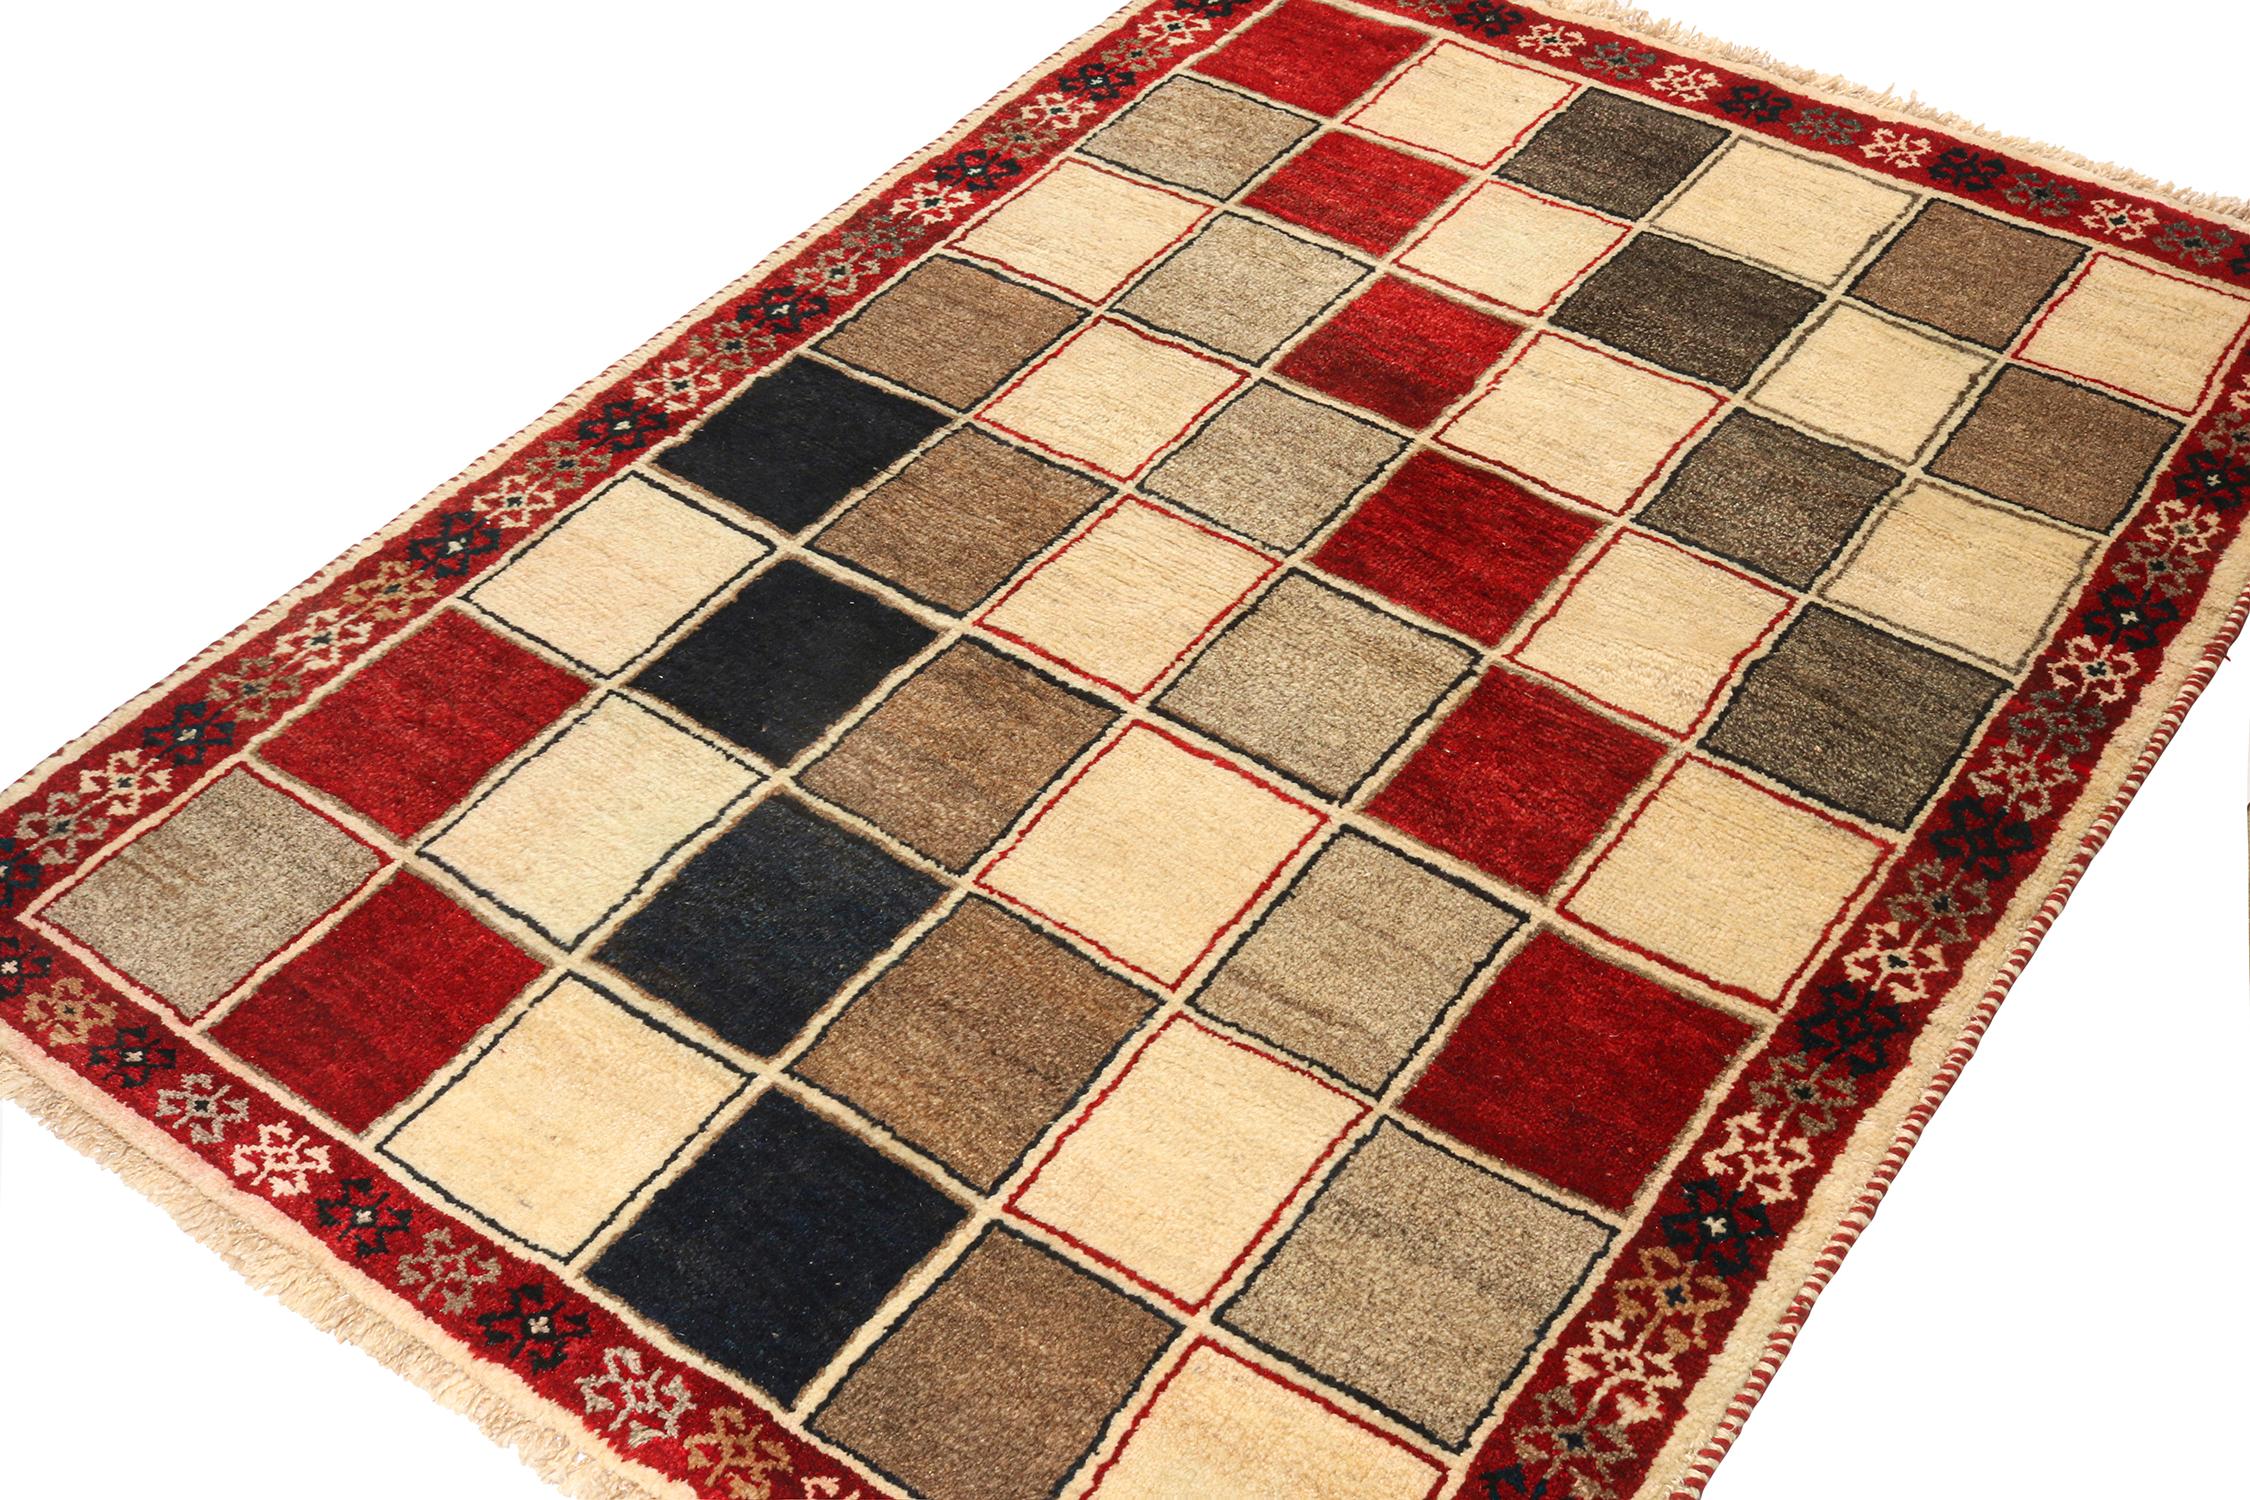 This vintage 4x6 Gabbeh Persian rug is from the latest entries in Rug & Kilim’s rare tribal curations. Hand-knotted in wool circa 1950-1960.
On the Design:
This tribal provenance is one of the most primitive, and collectible shabby-chic styles in